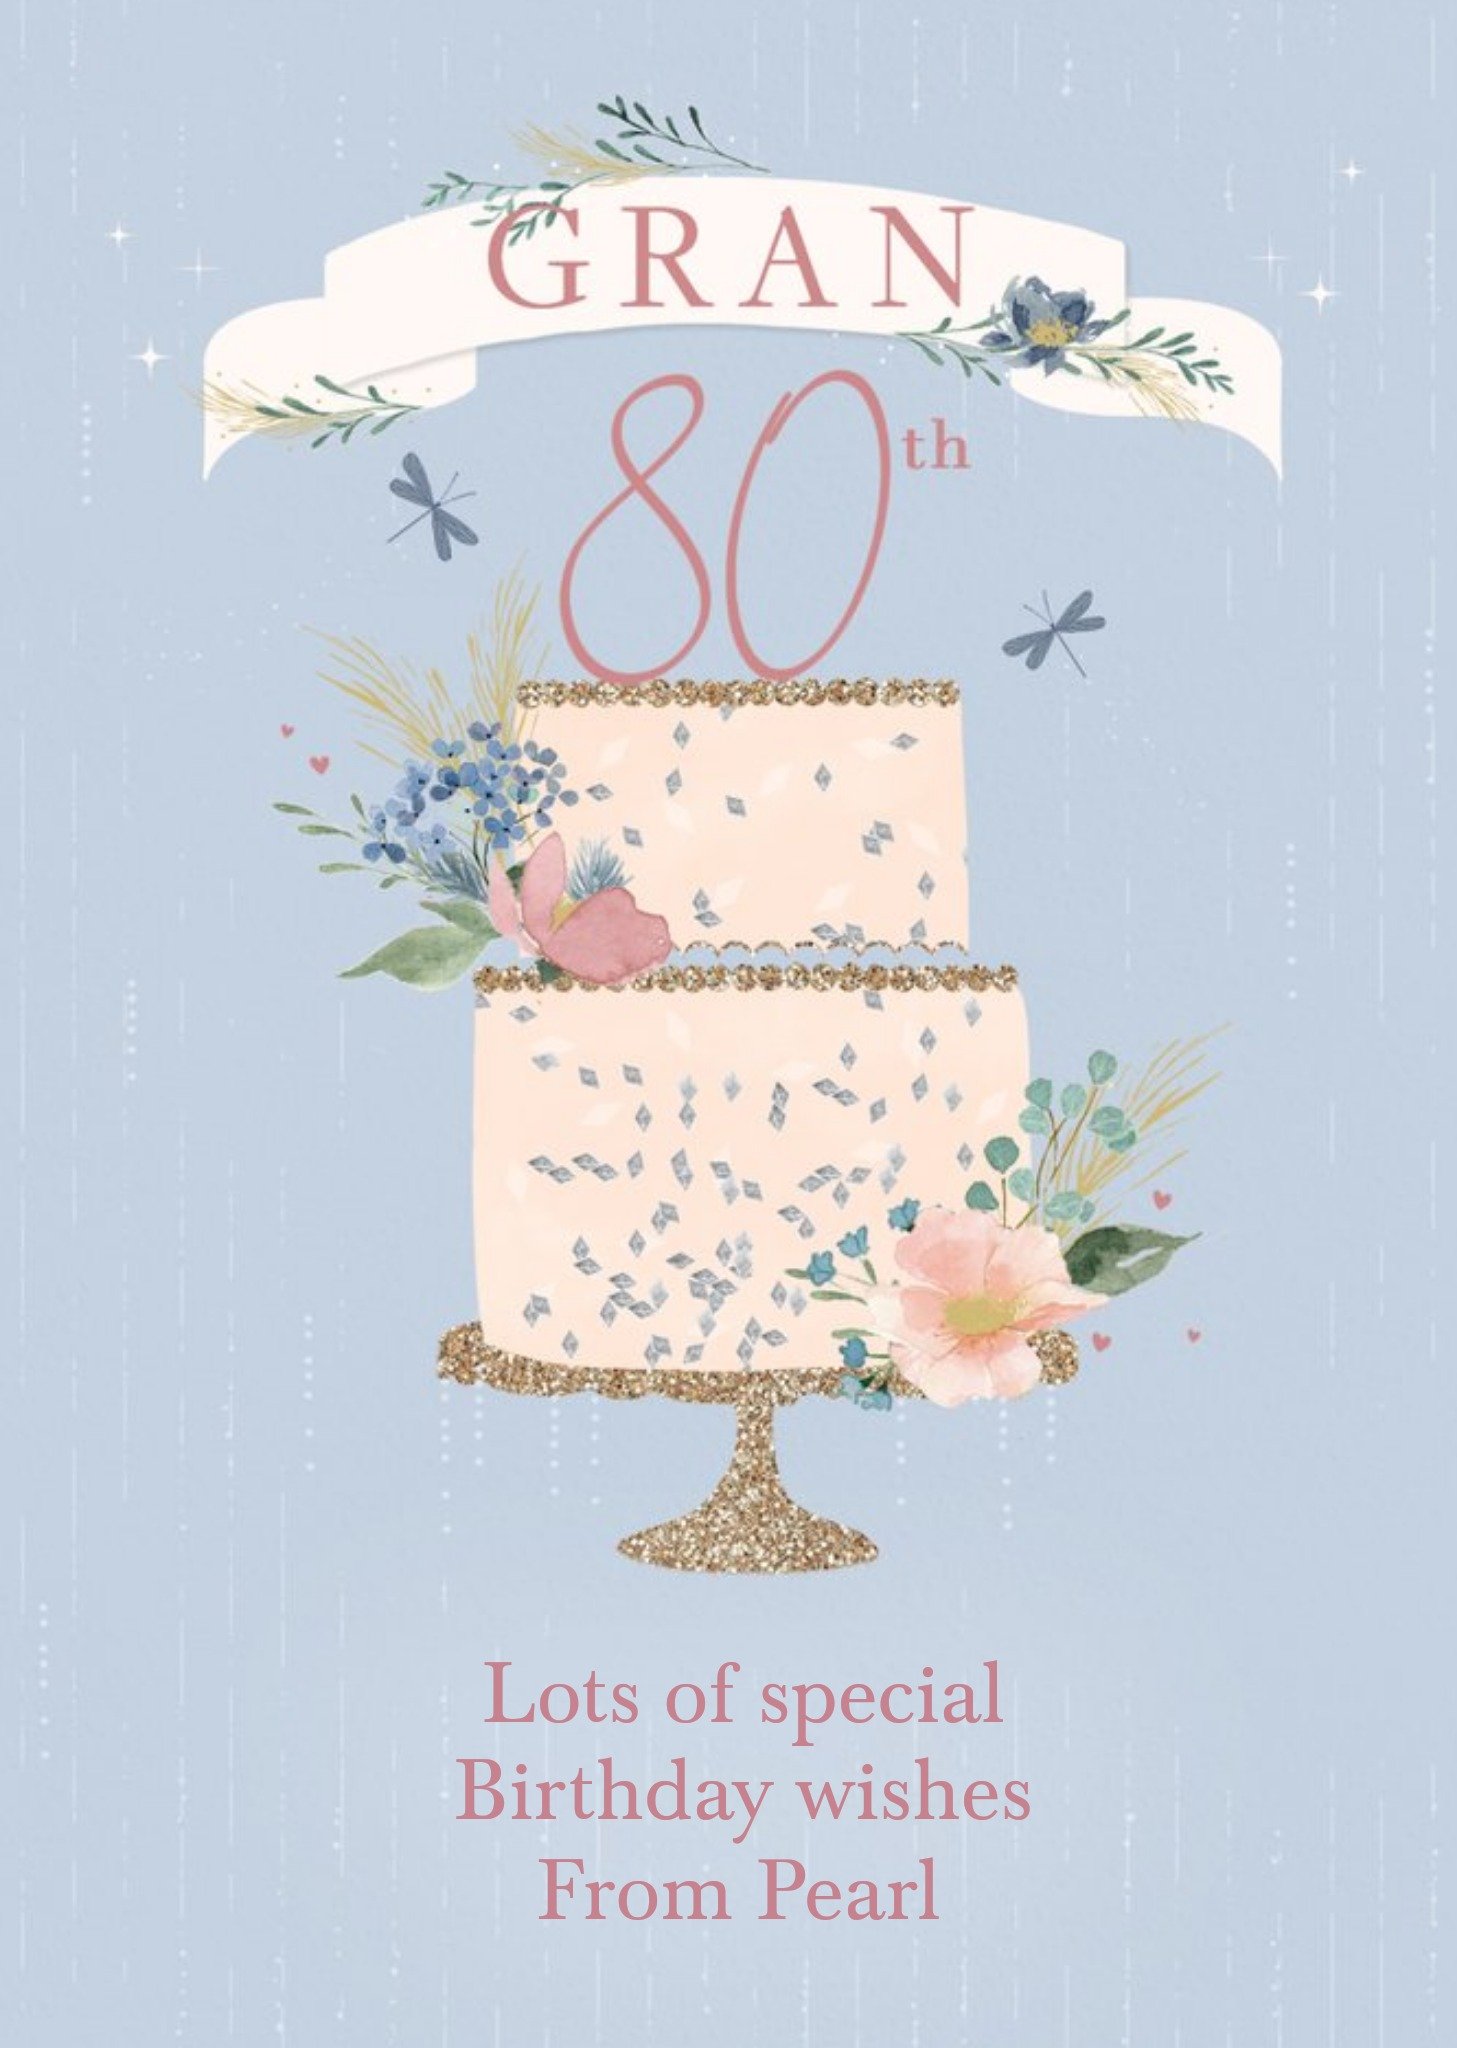 Moonpig Illustration Of A Two-Tier Cake Decorated With Flowers Gran's Eightieth Birthday Card Ecard